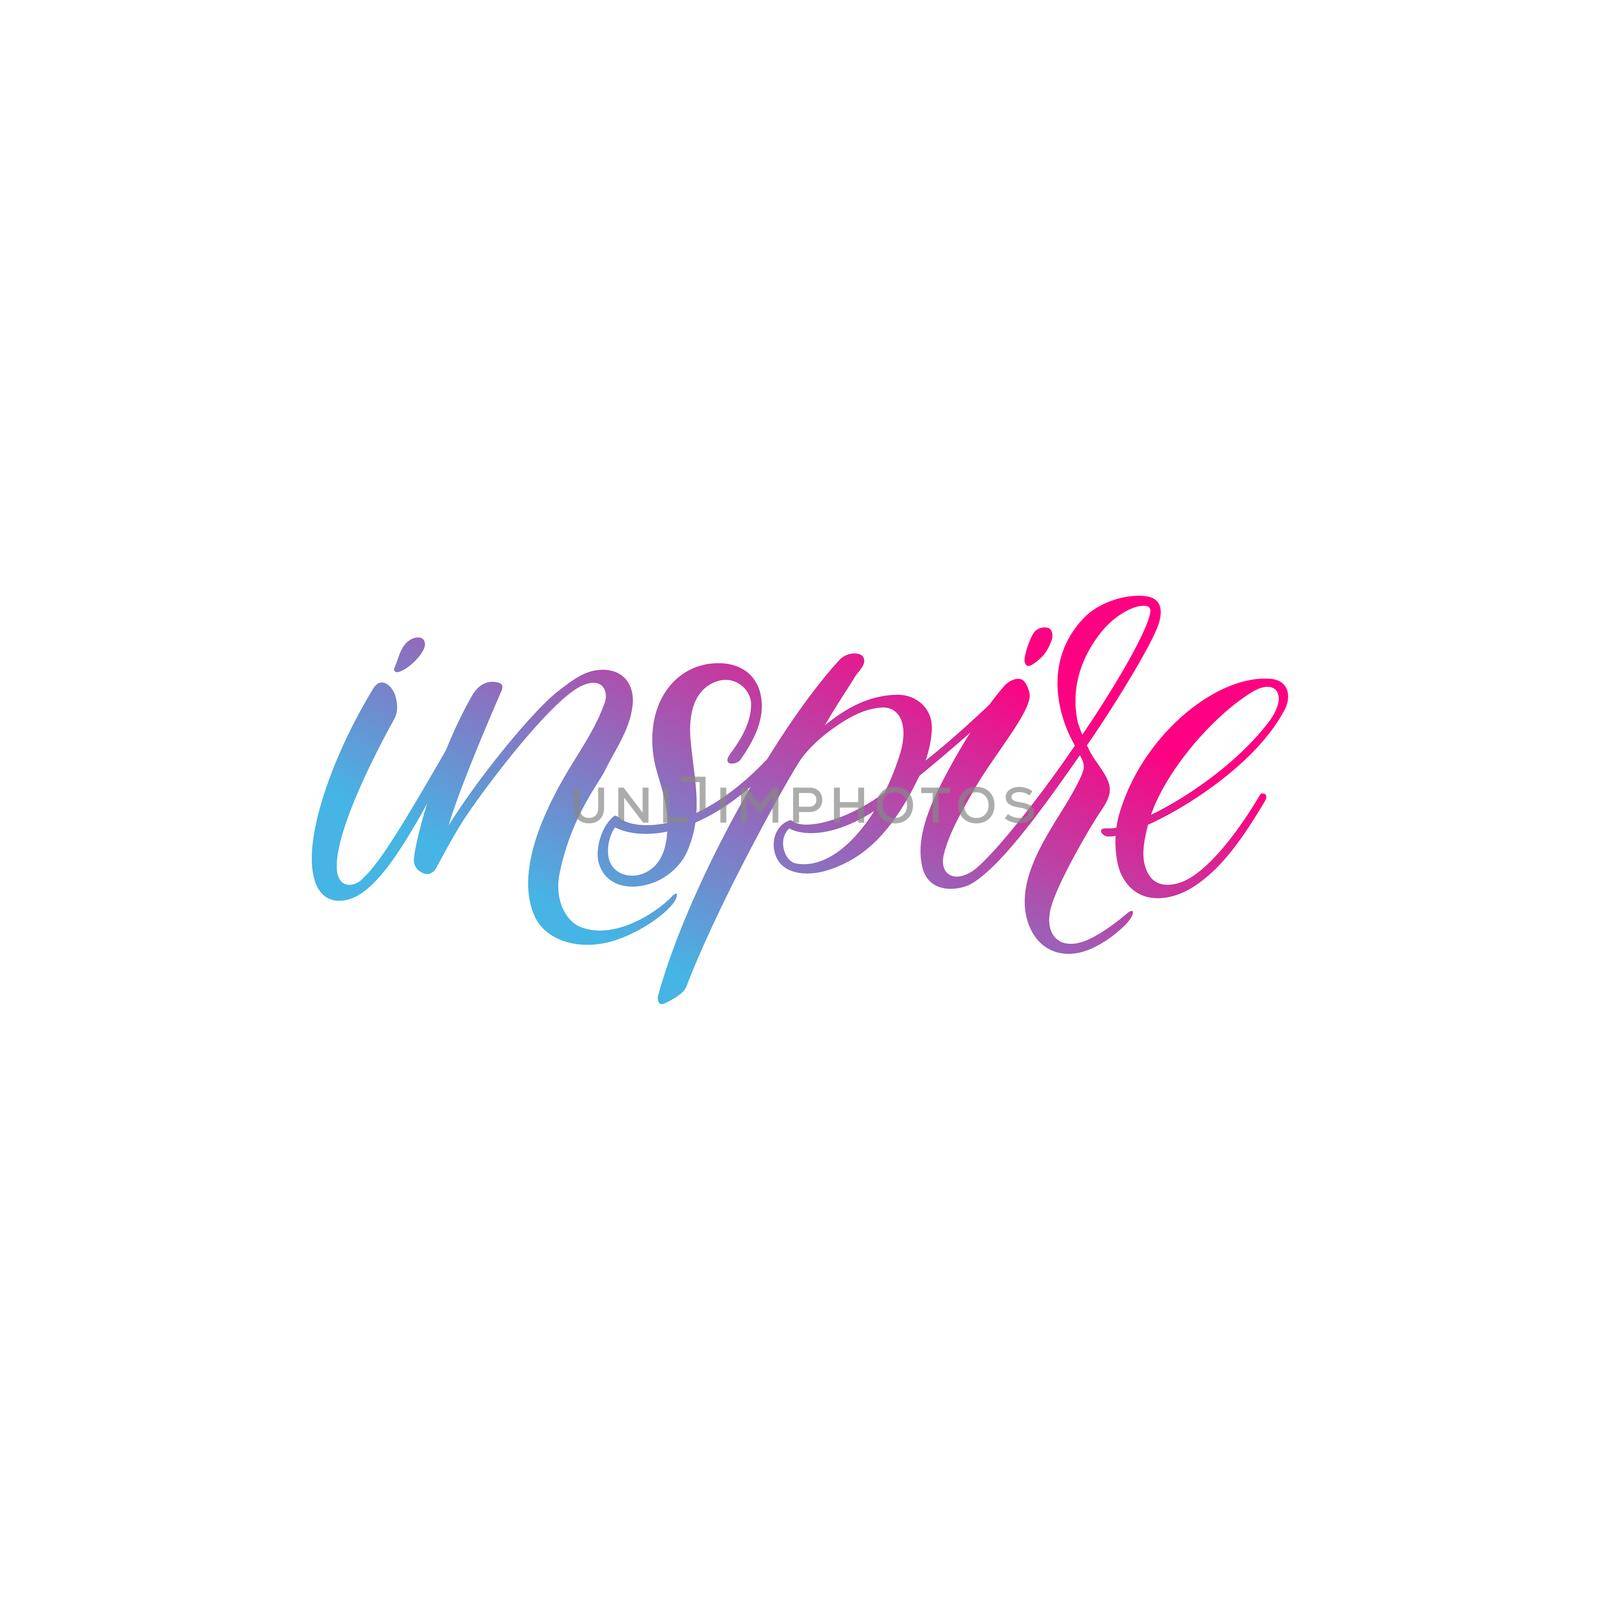 Inspire calligraphy vector illustration. Hand lettering text